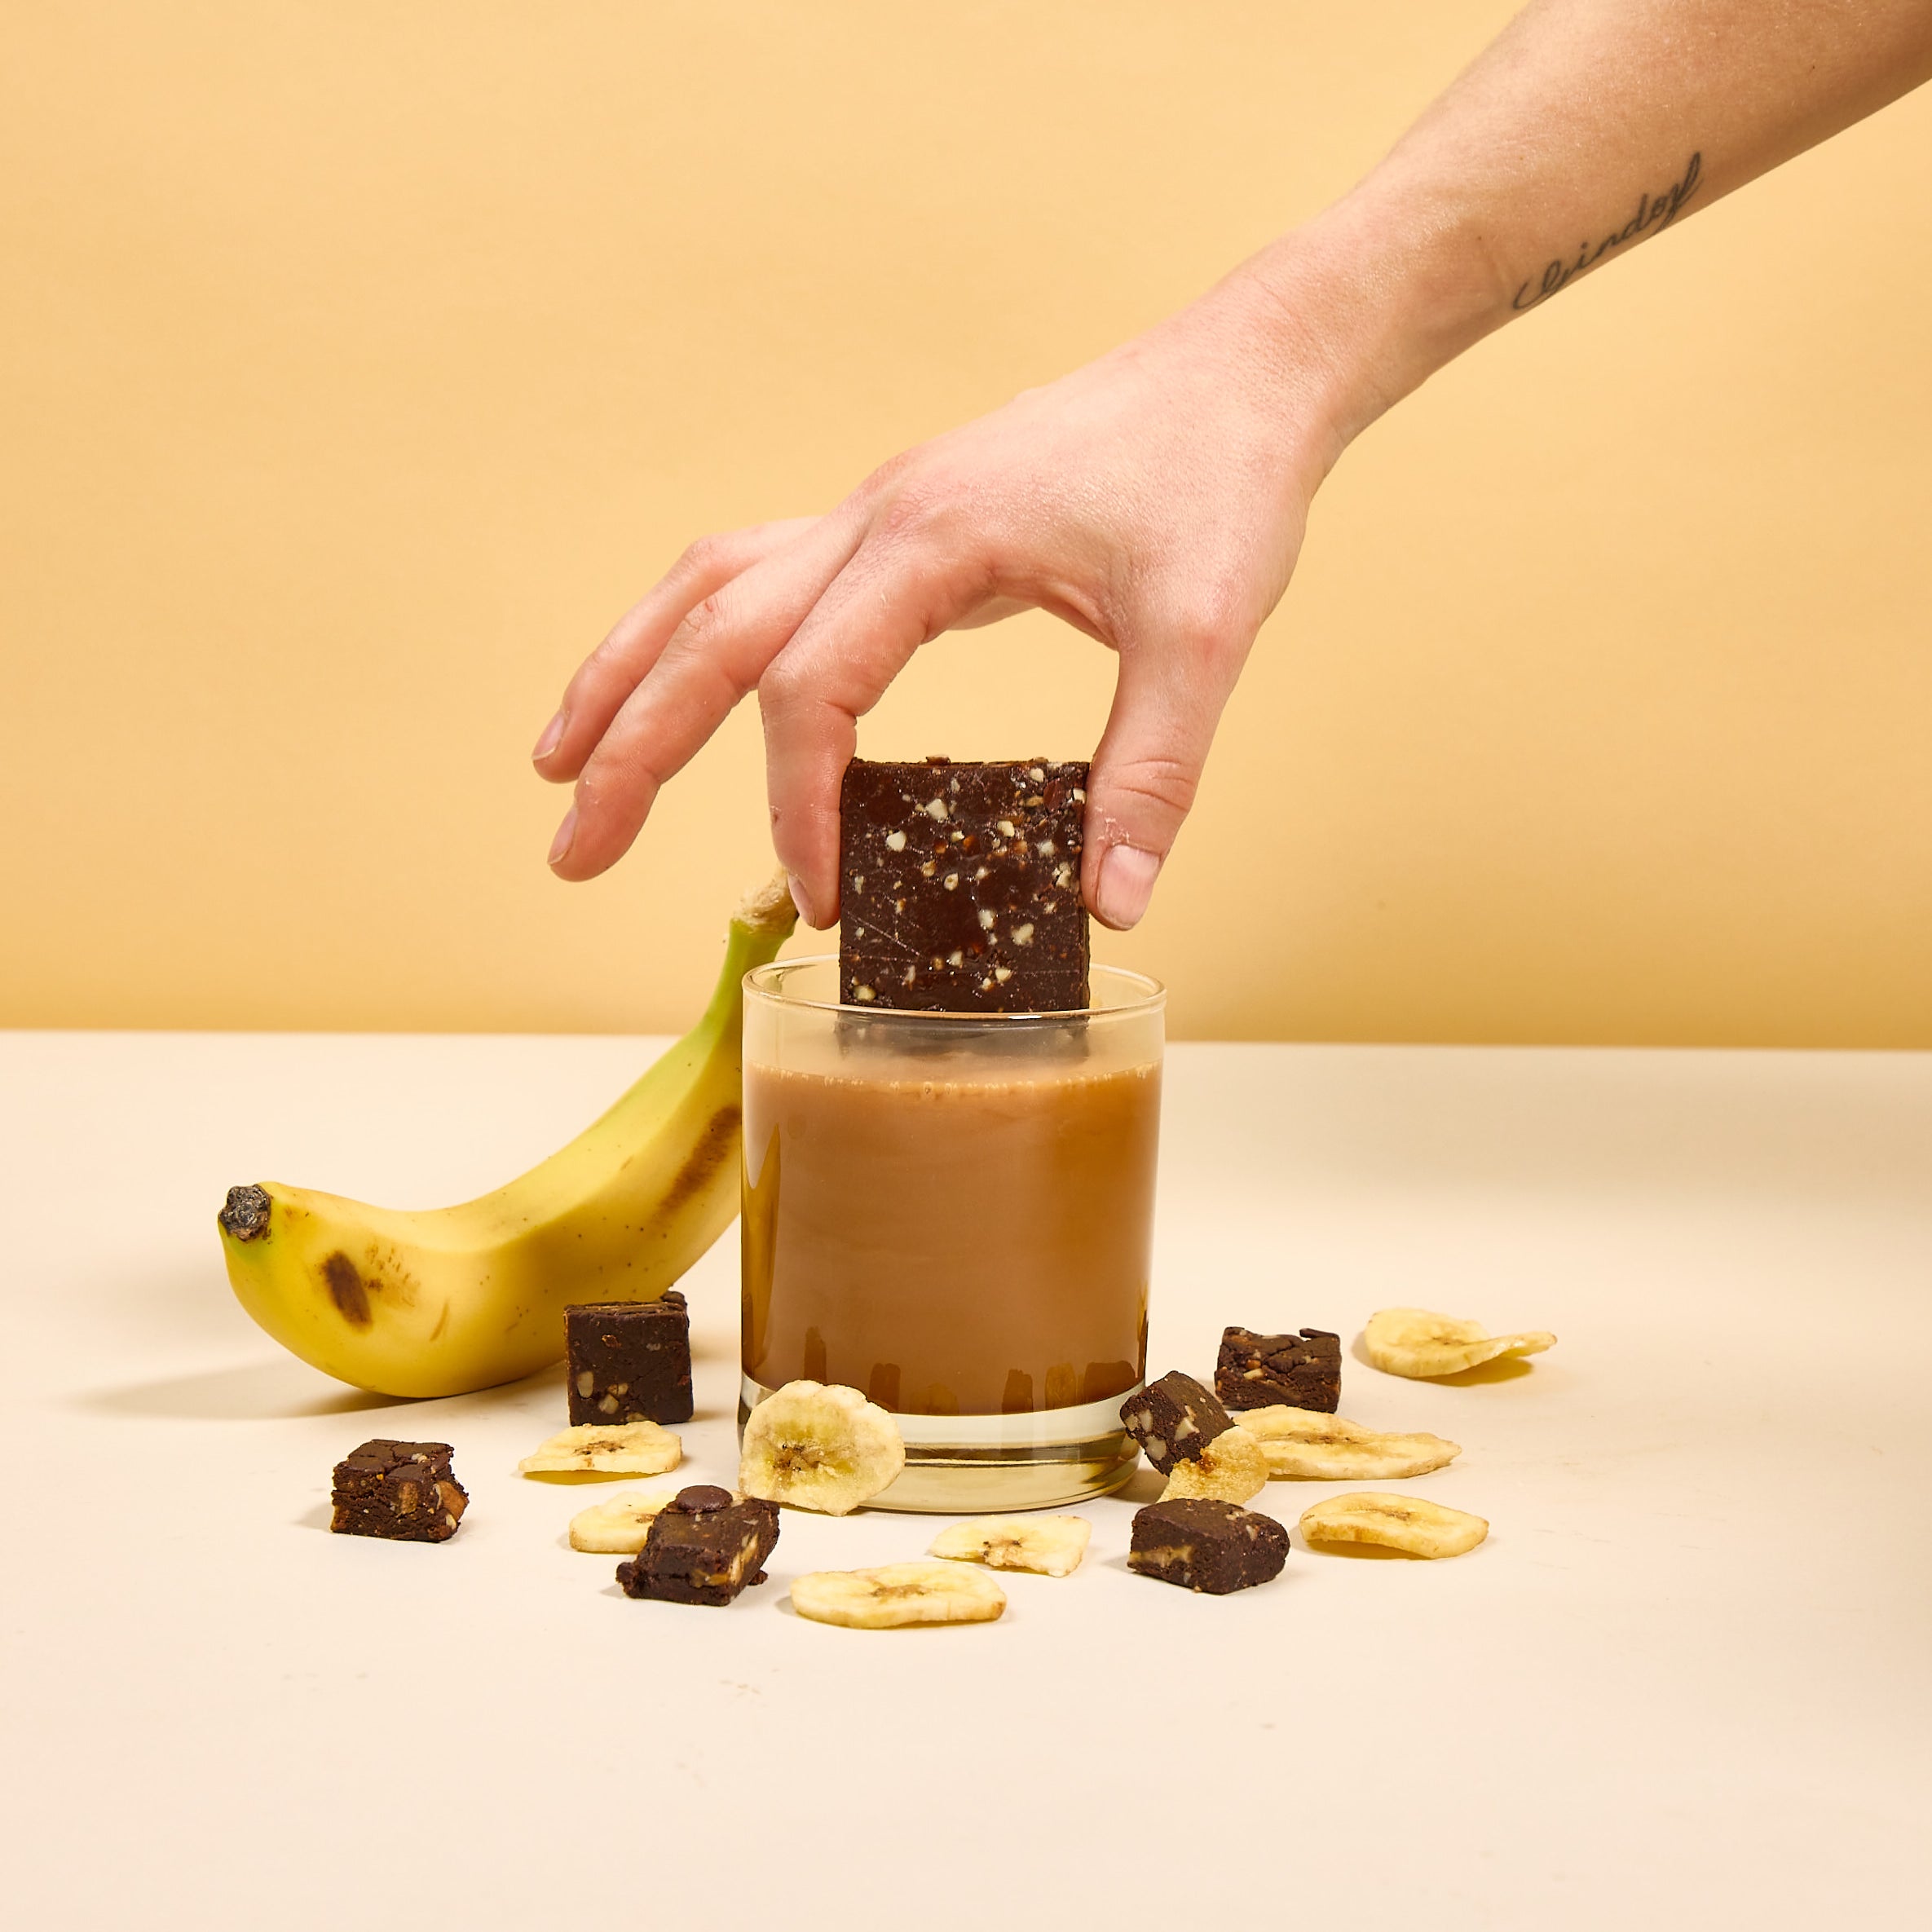 Hand holding Lucid's Banana Bread Snack Bar, dipping into a glass of caramel, with a banana leaning against the glass and surrounded by chocolate pieces and banana chips.